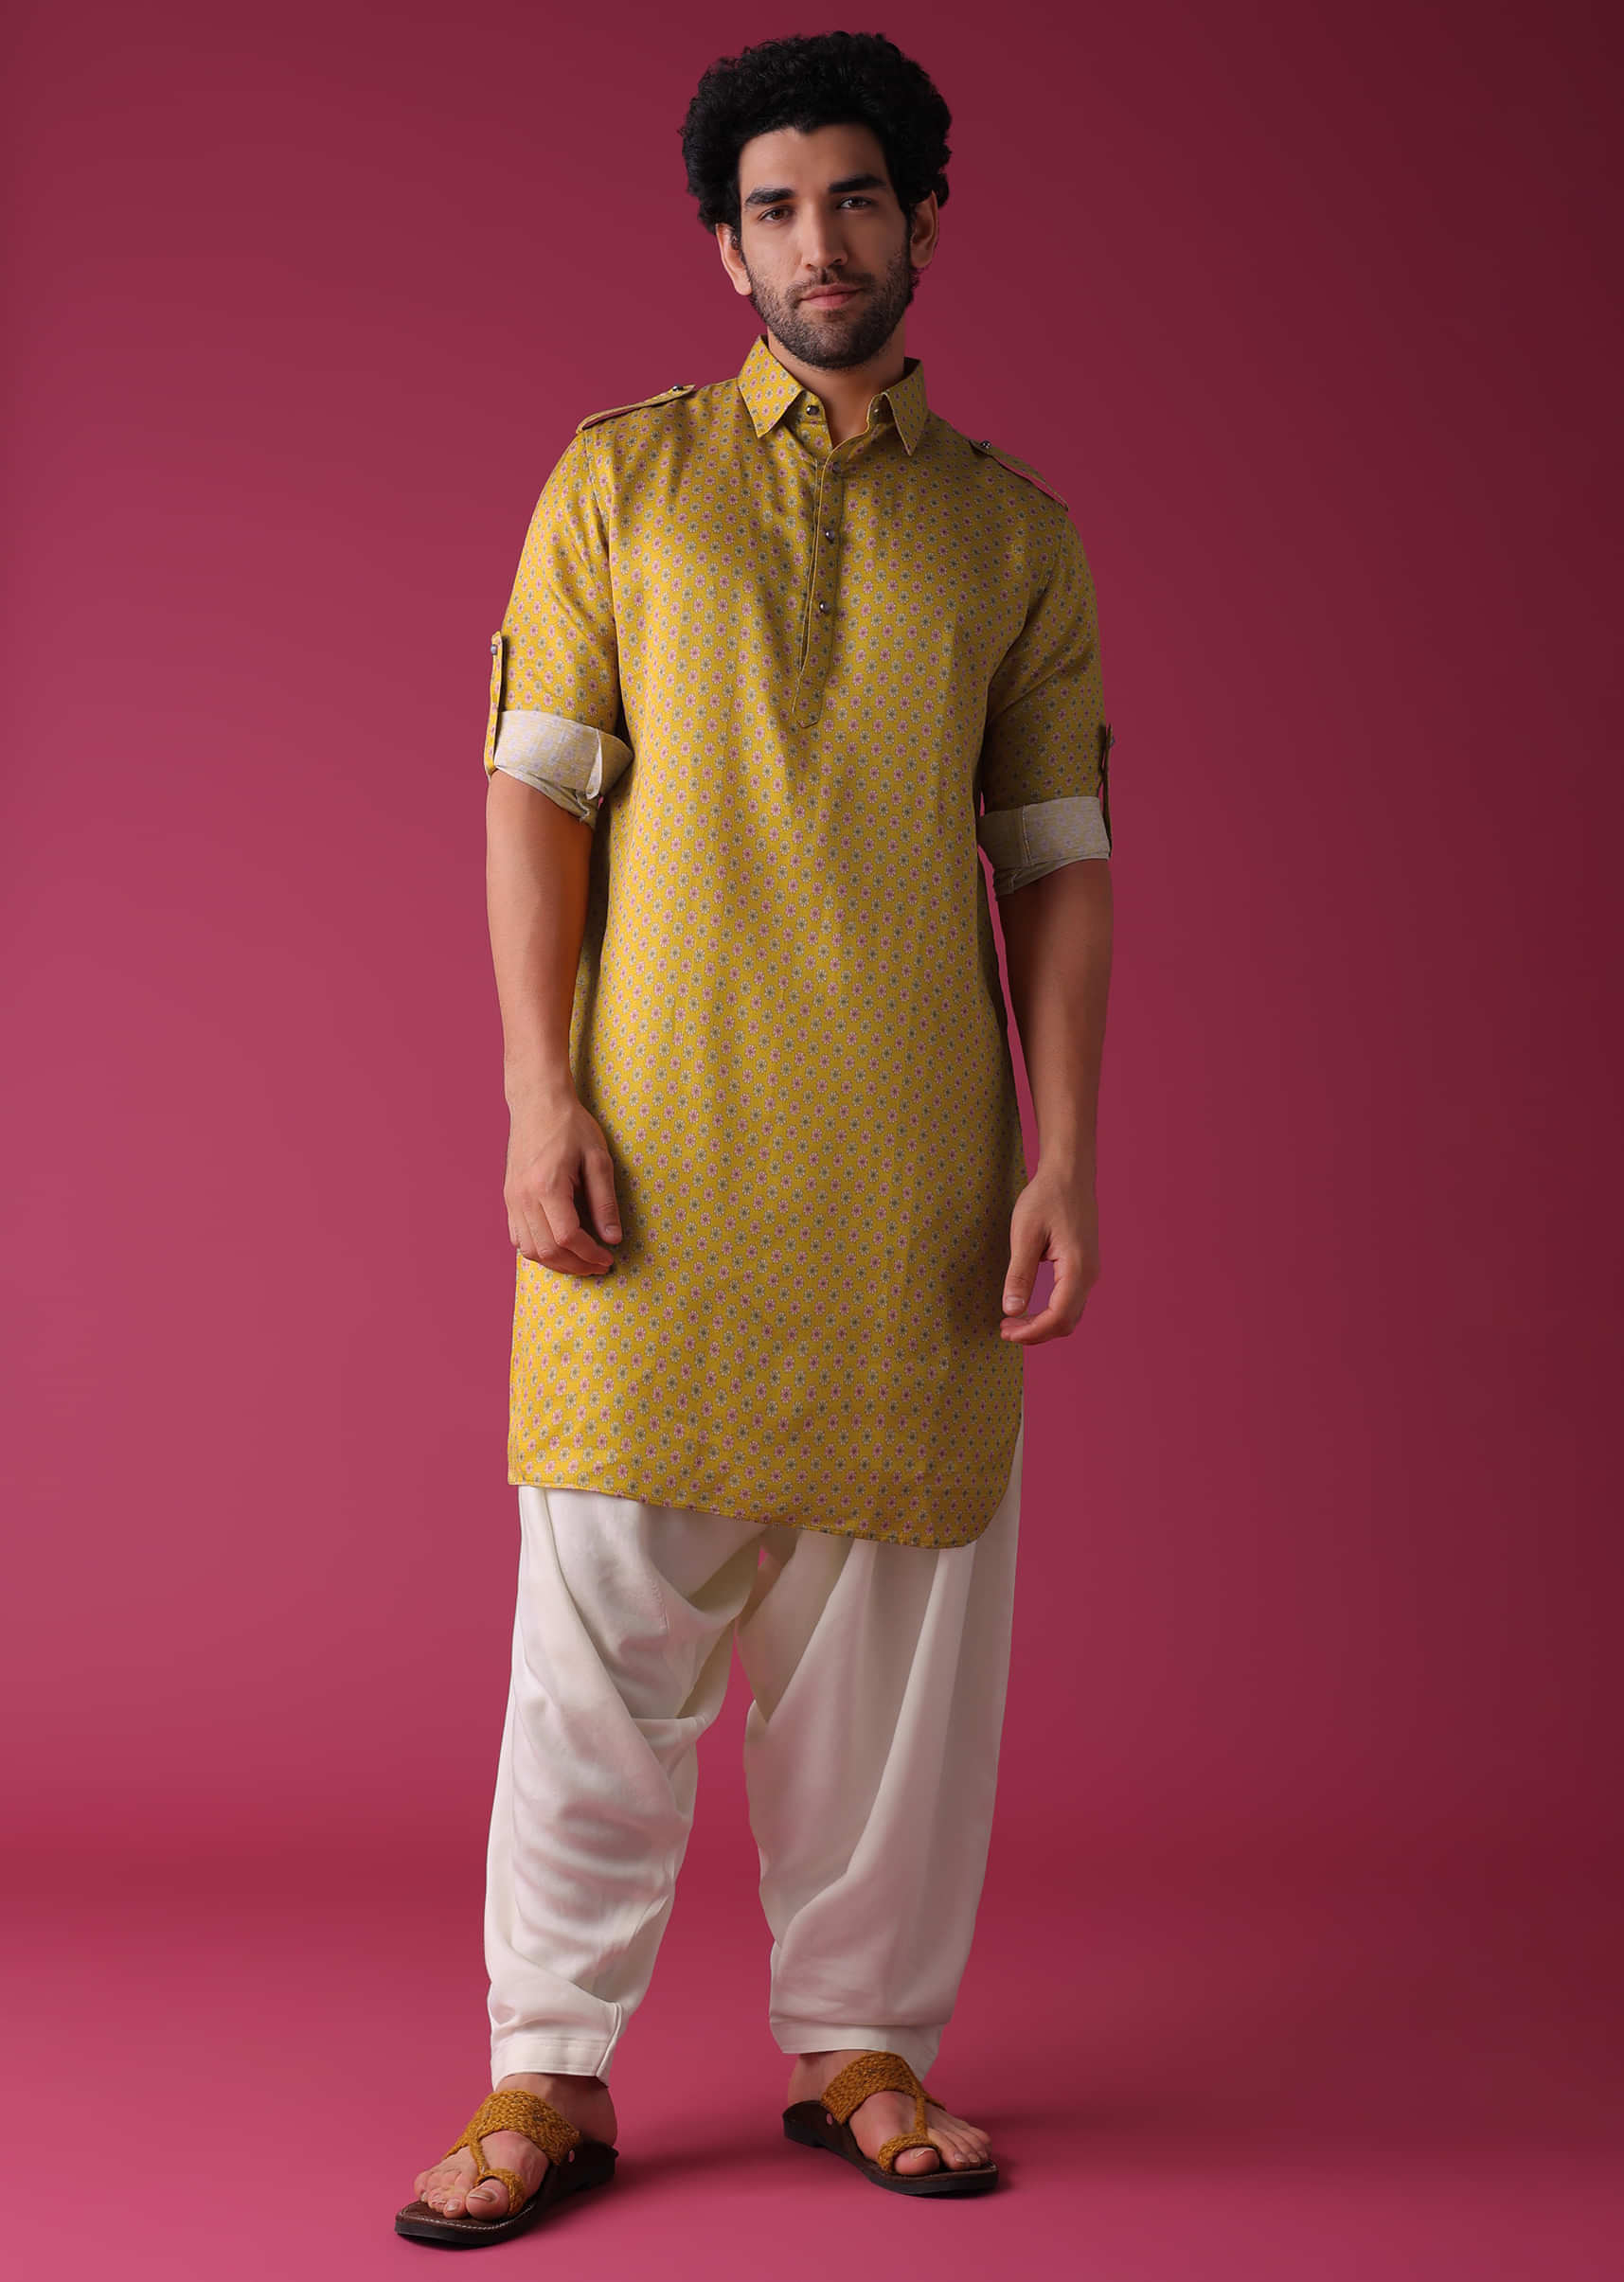 Chrome Yellow Jacket Kurta Set In Linen With Floral Pattern